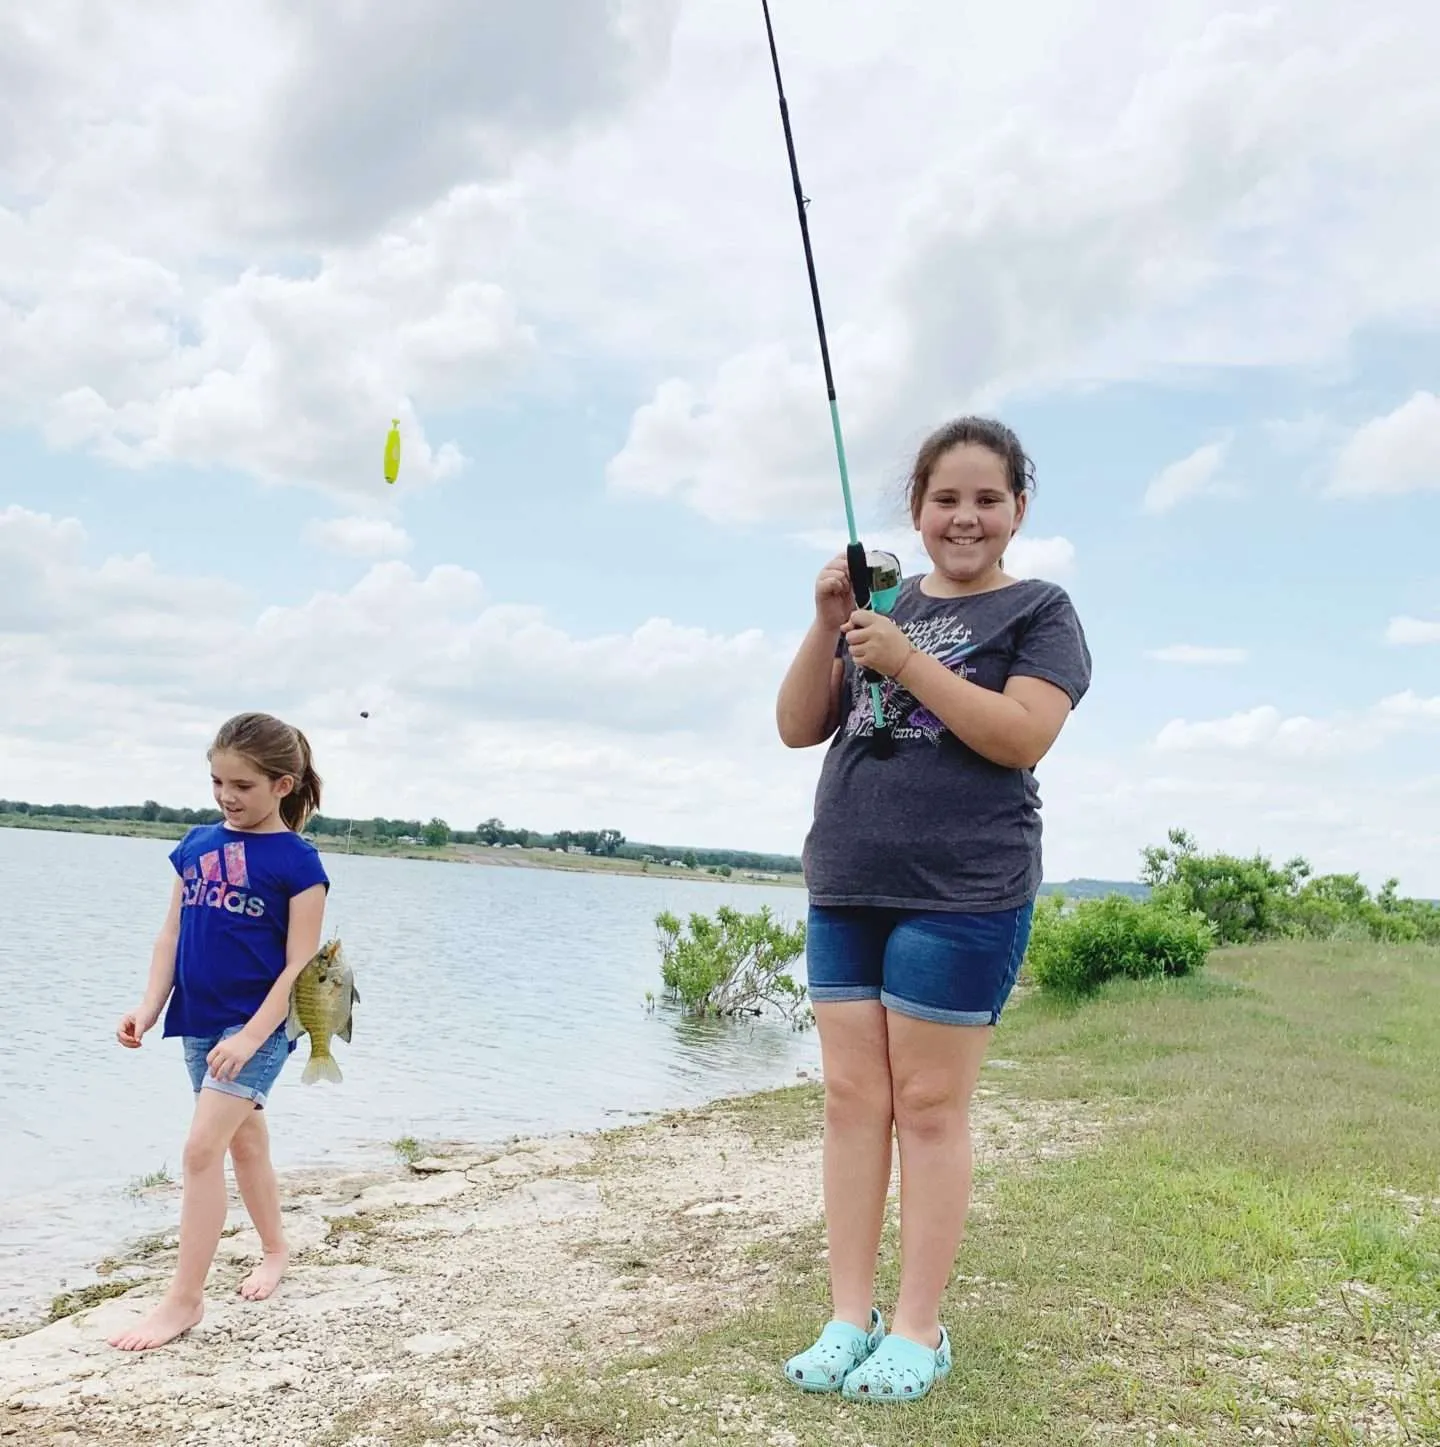 Fishing near Fort Hood at Rivers Bend Park. A summer adventure